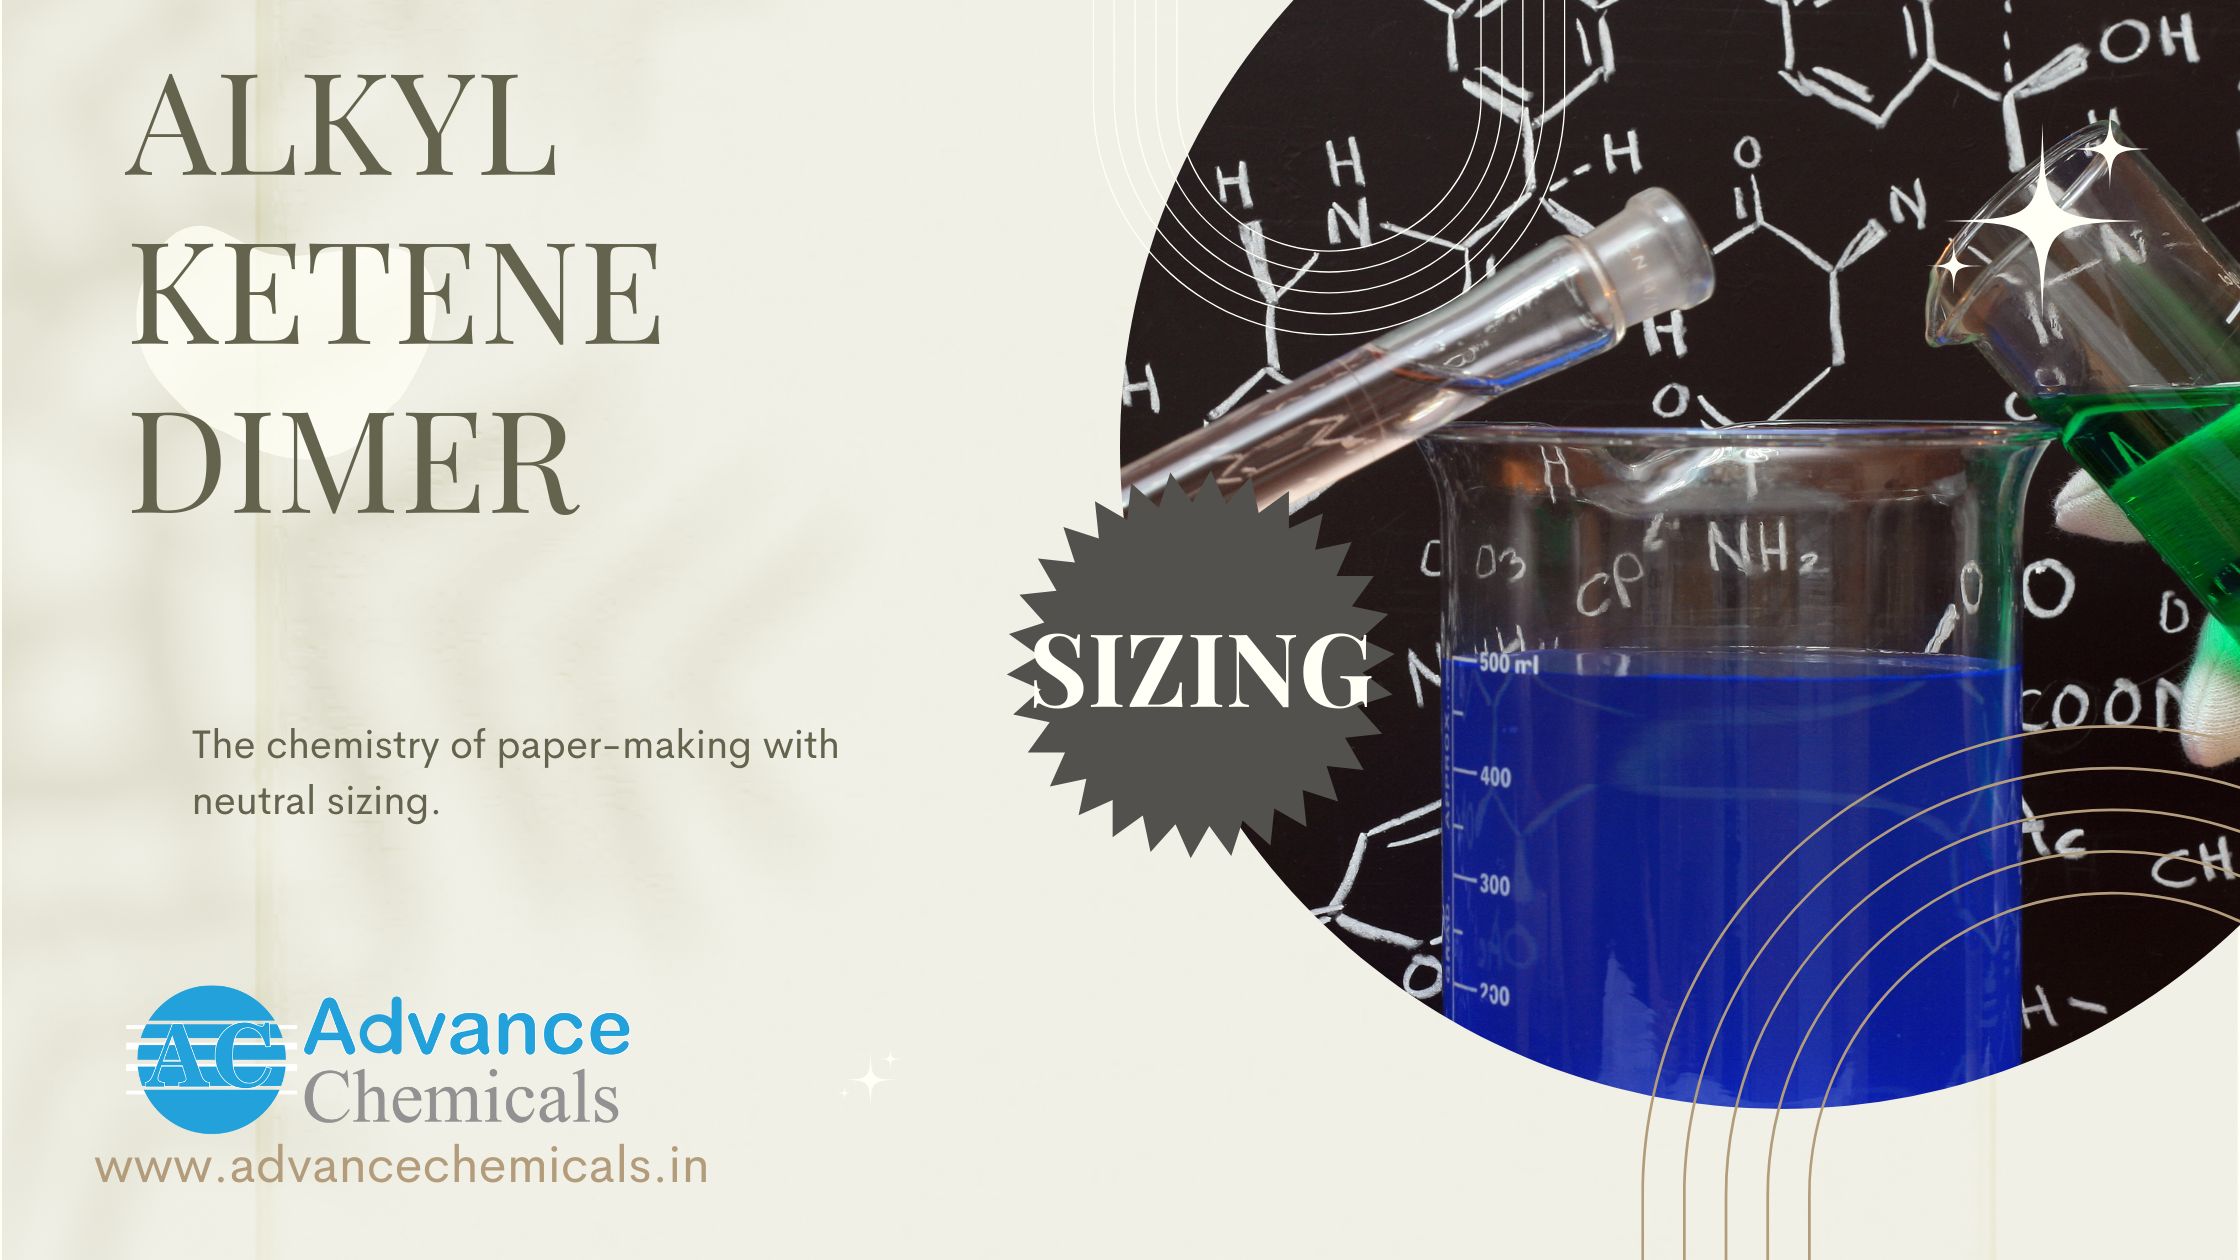 Alkyl ketene dimer – New Age Paper Sizing